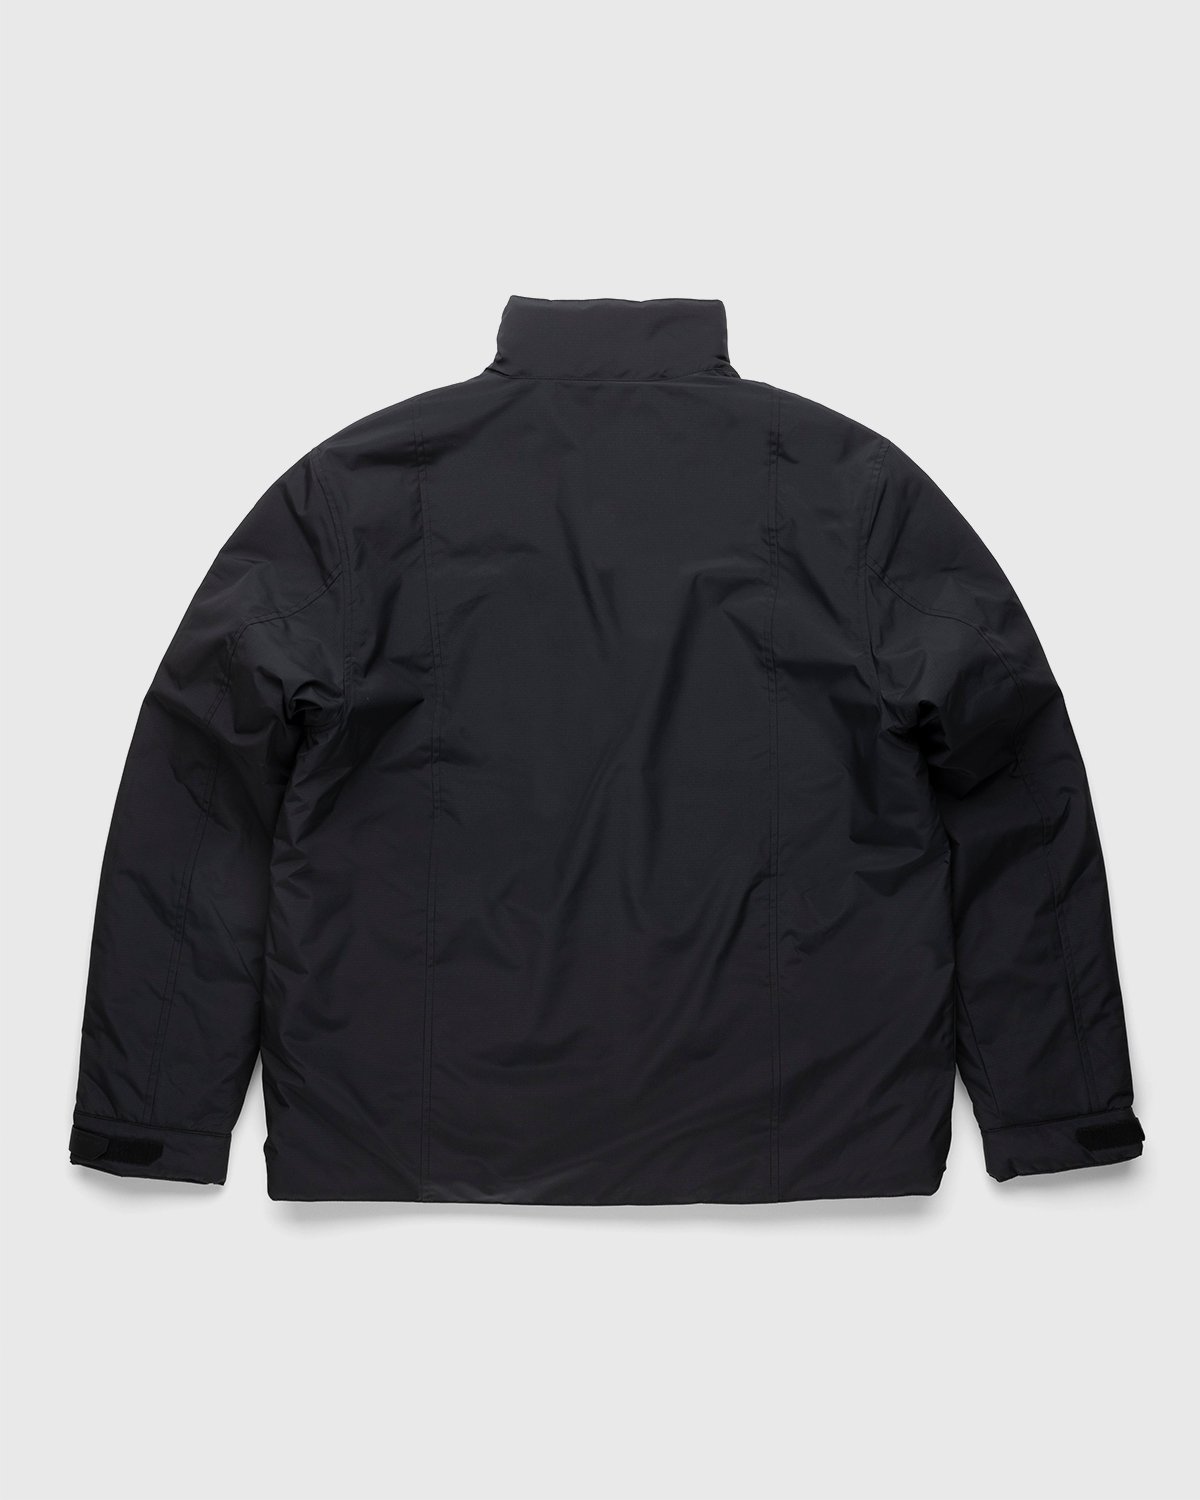 A-Cold-Wall* - Technical Bomber Black - Clothing - Black - Image 2